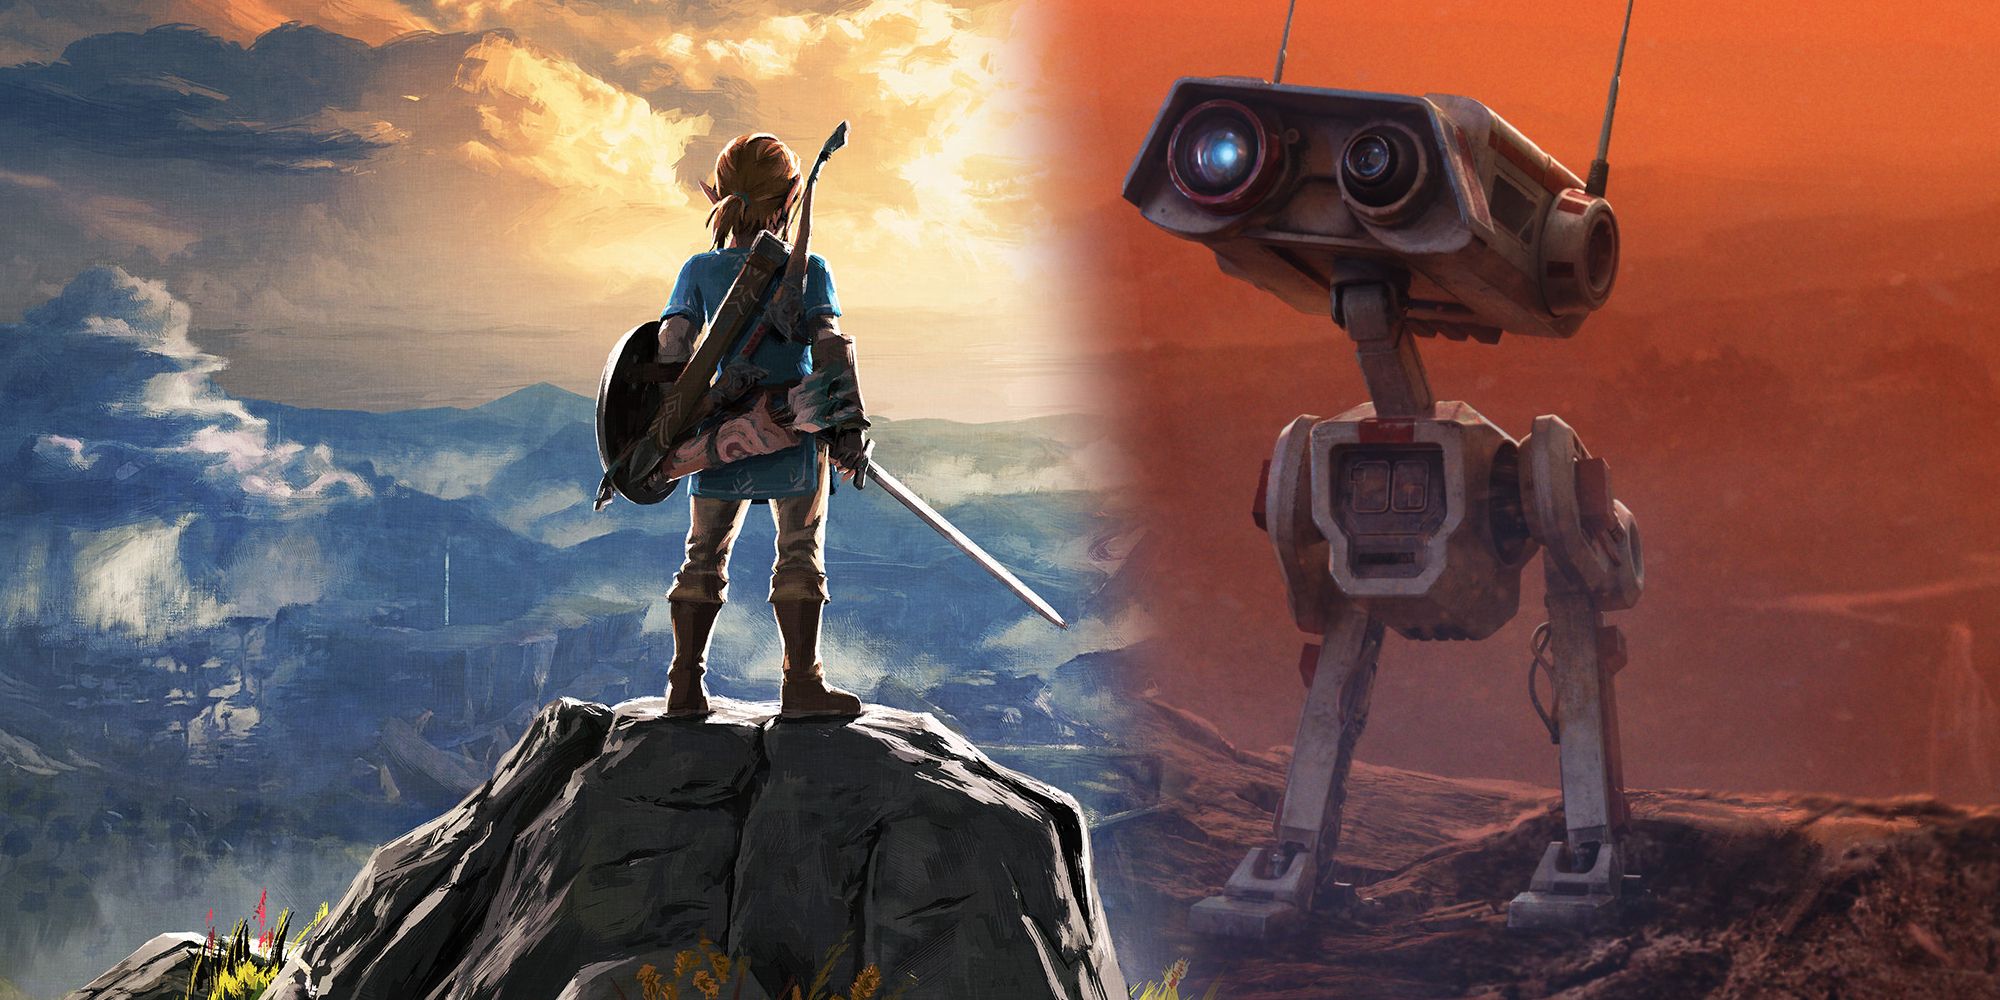 Link in promotional art for Breath of the Wild blurred into an image of BD-1 from Star Wars Jedi: Survivor.